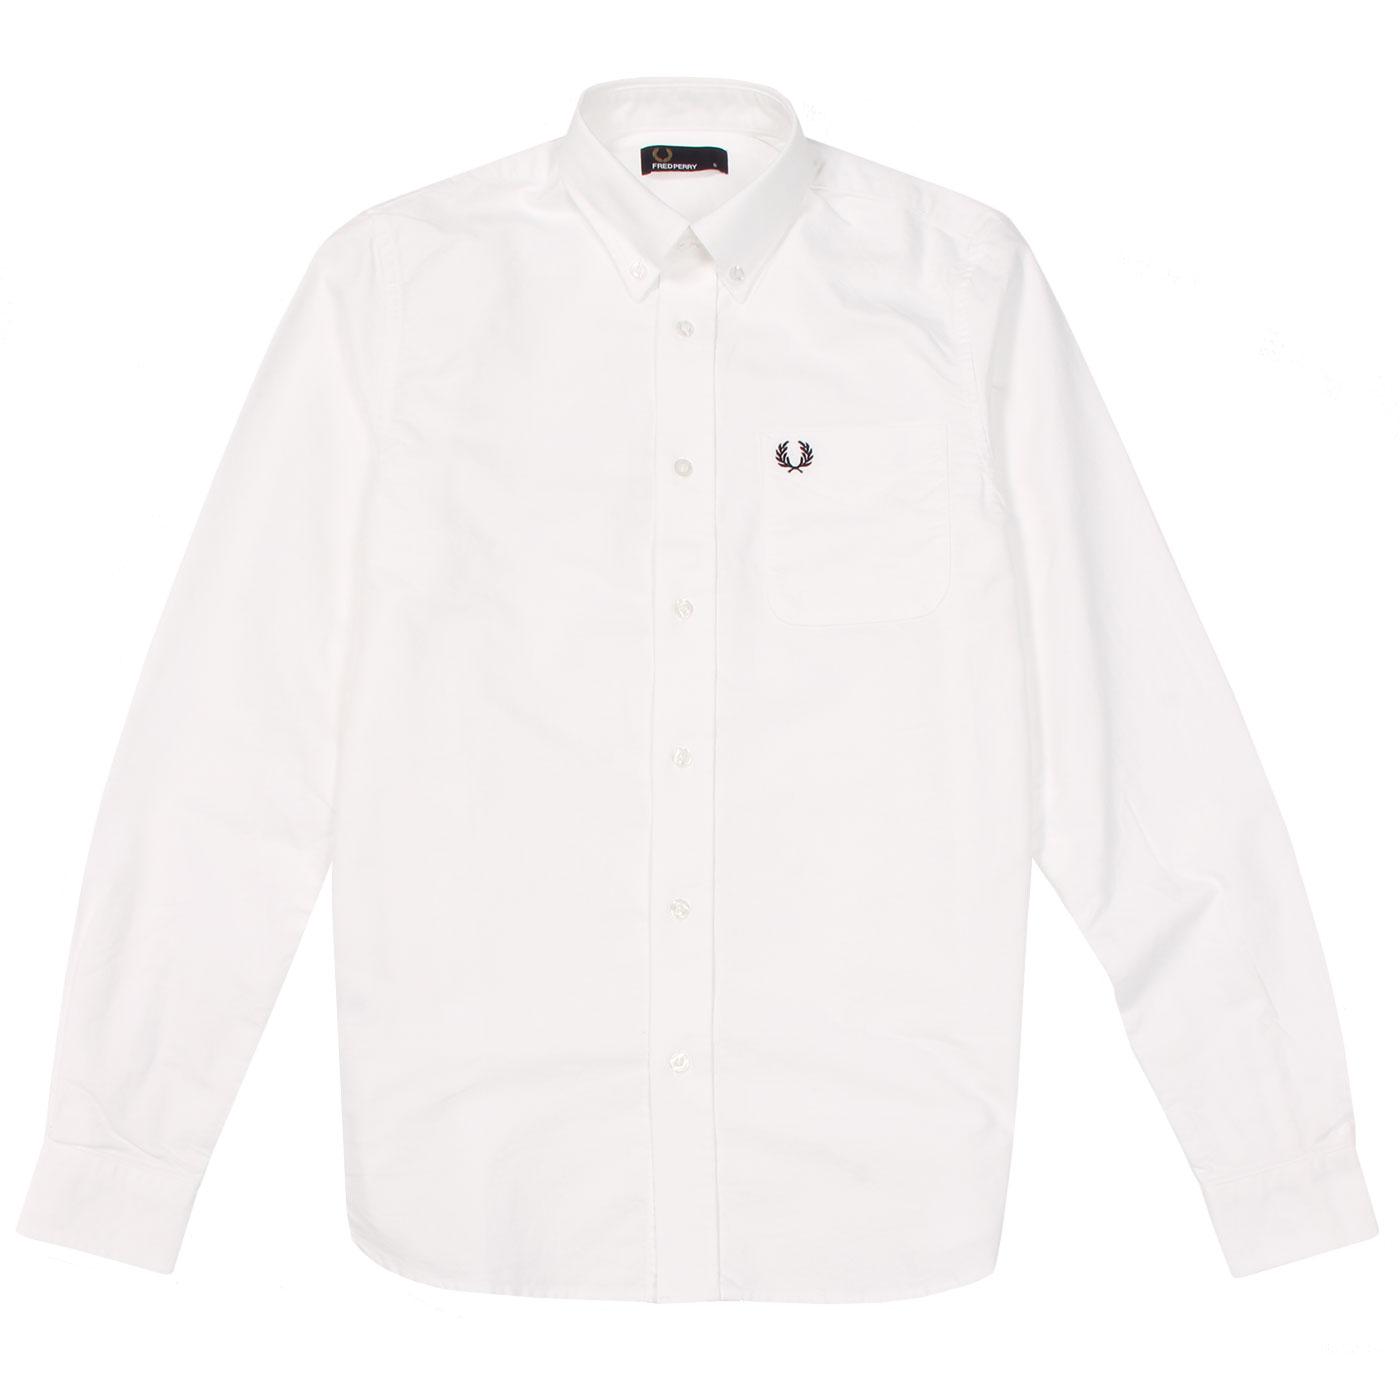 FRED PERRY Men's Classic Button Down Oxford Shirt in White